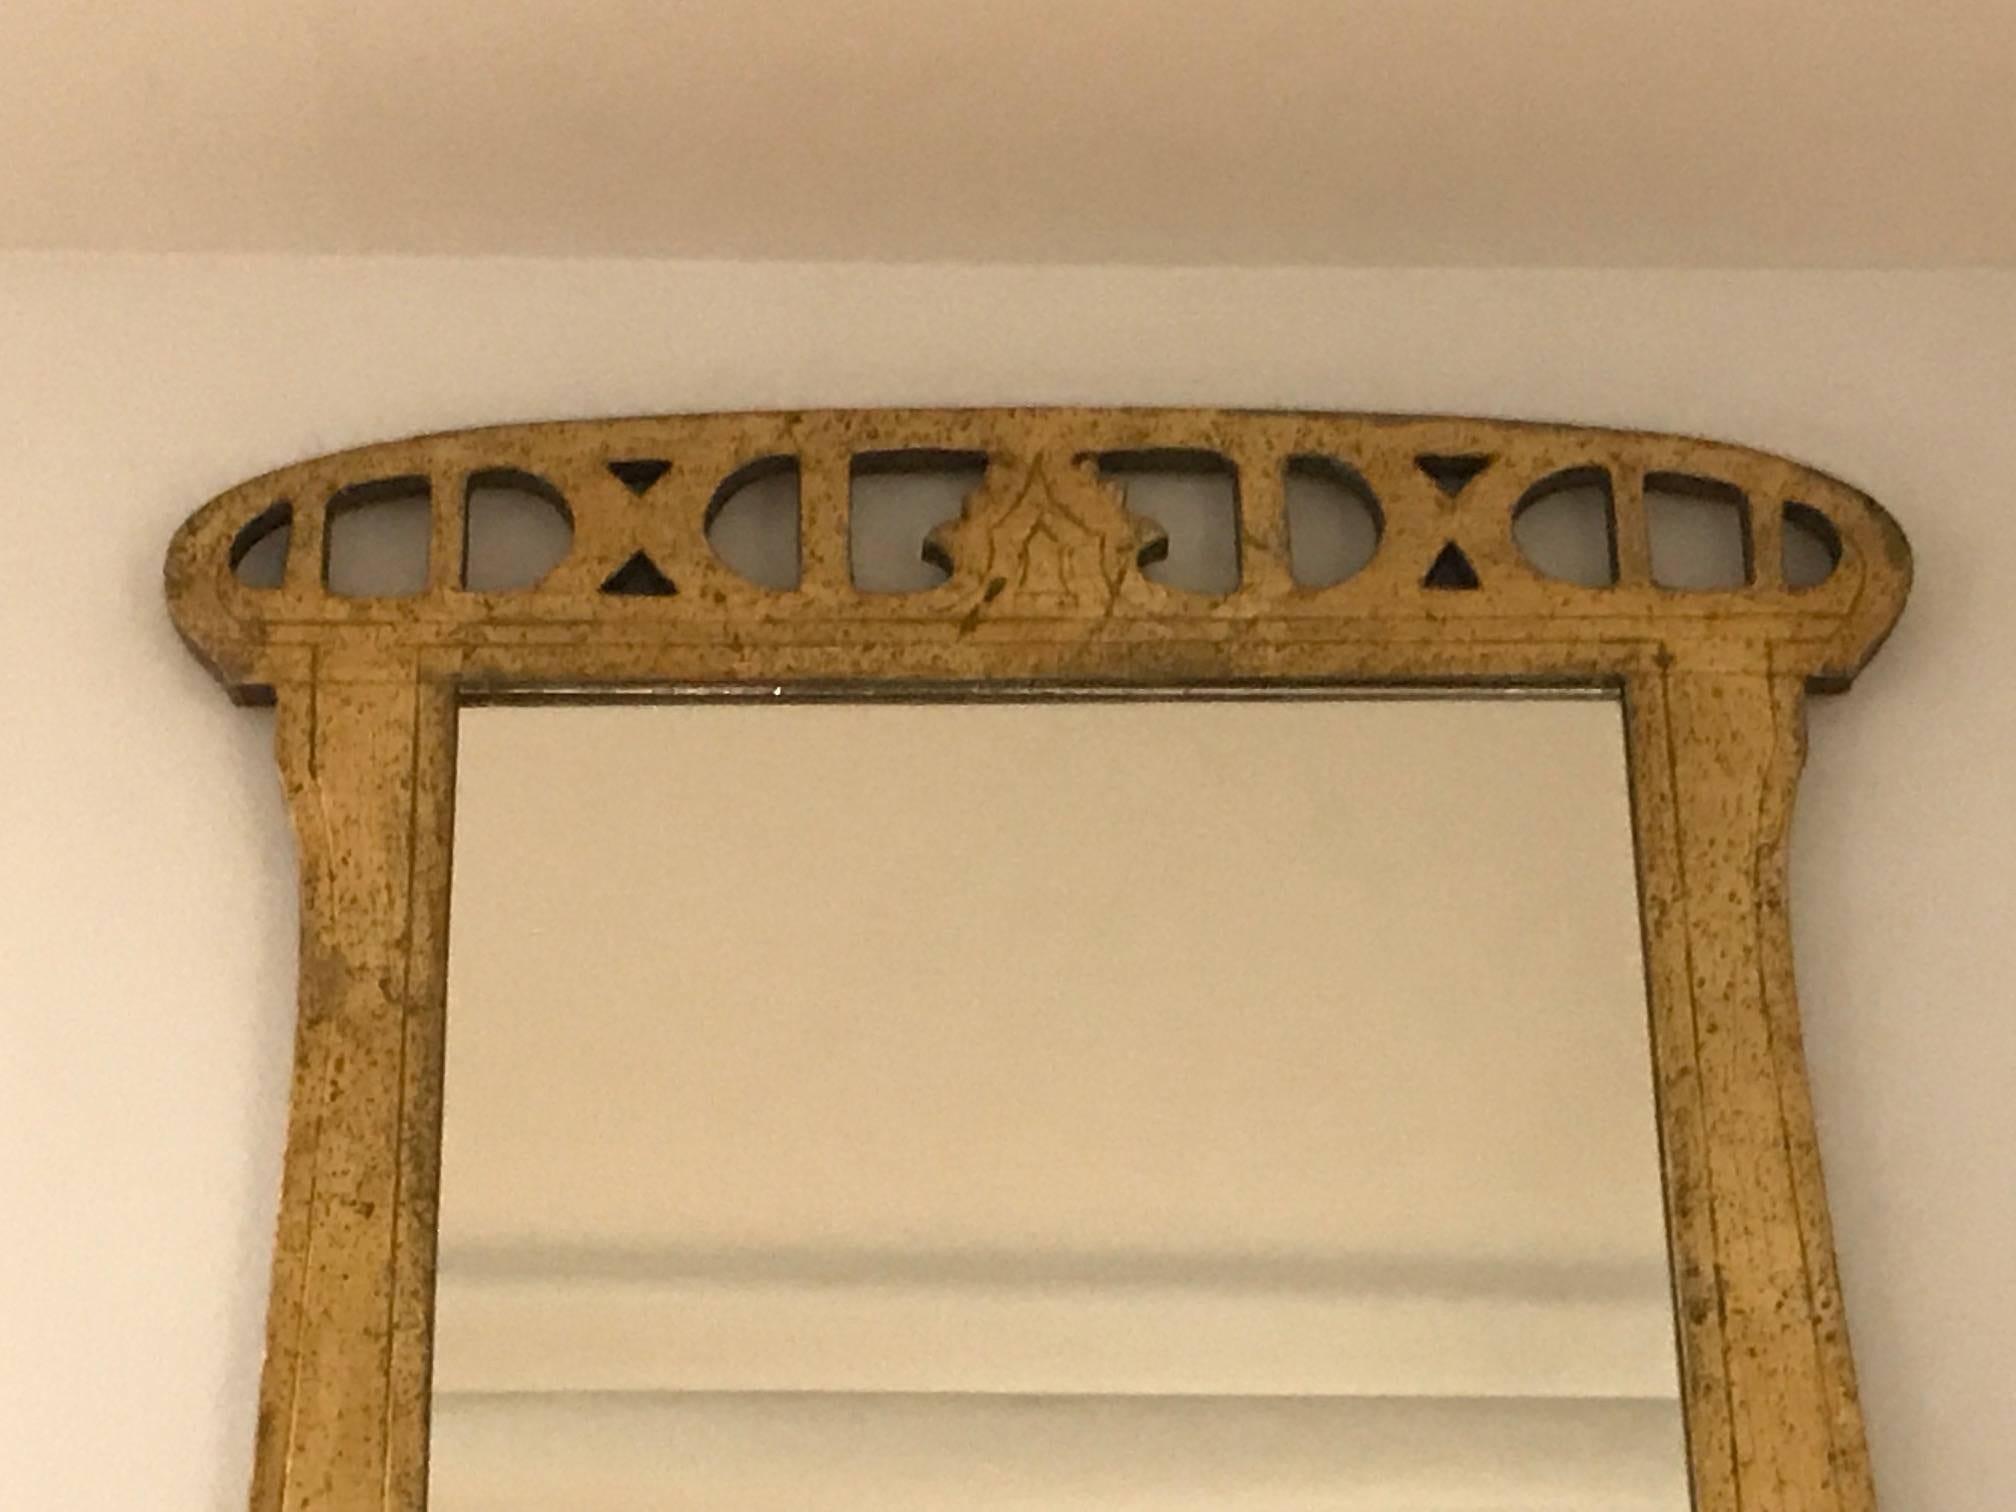 hand carved and gild early 20th century Art Nouveau mirror, made in Spain. Original water gilt surface is in excellent condition.
Outside dimensions 30 1/4